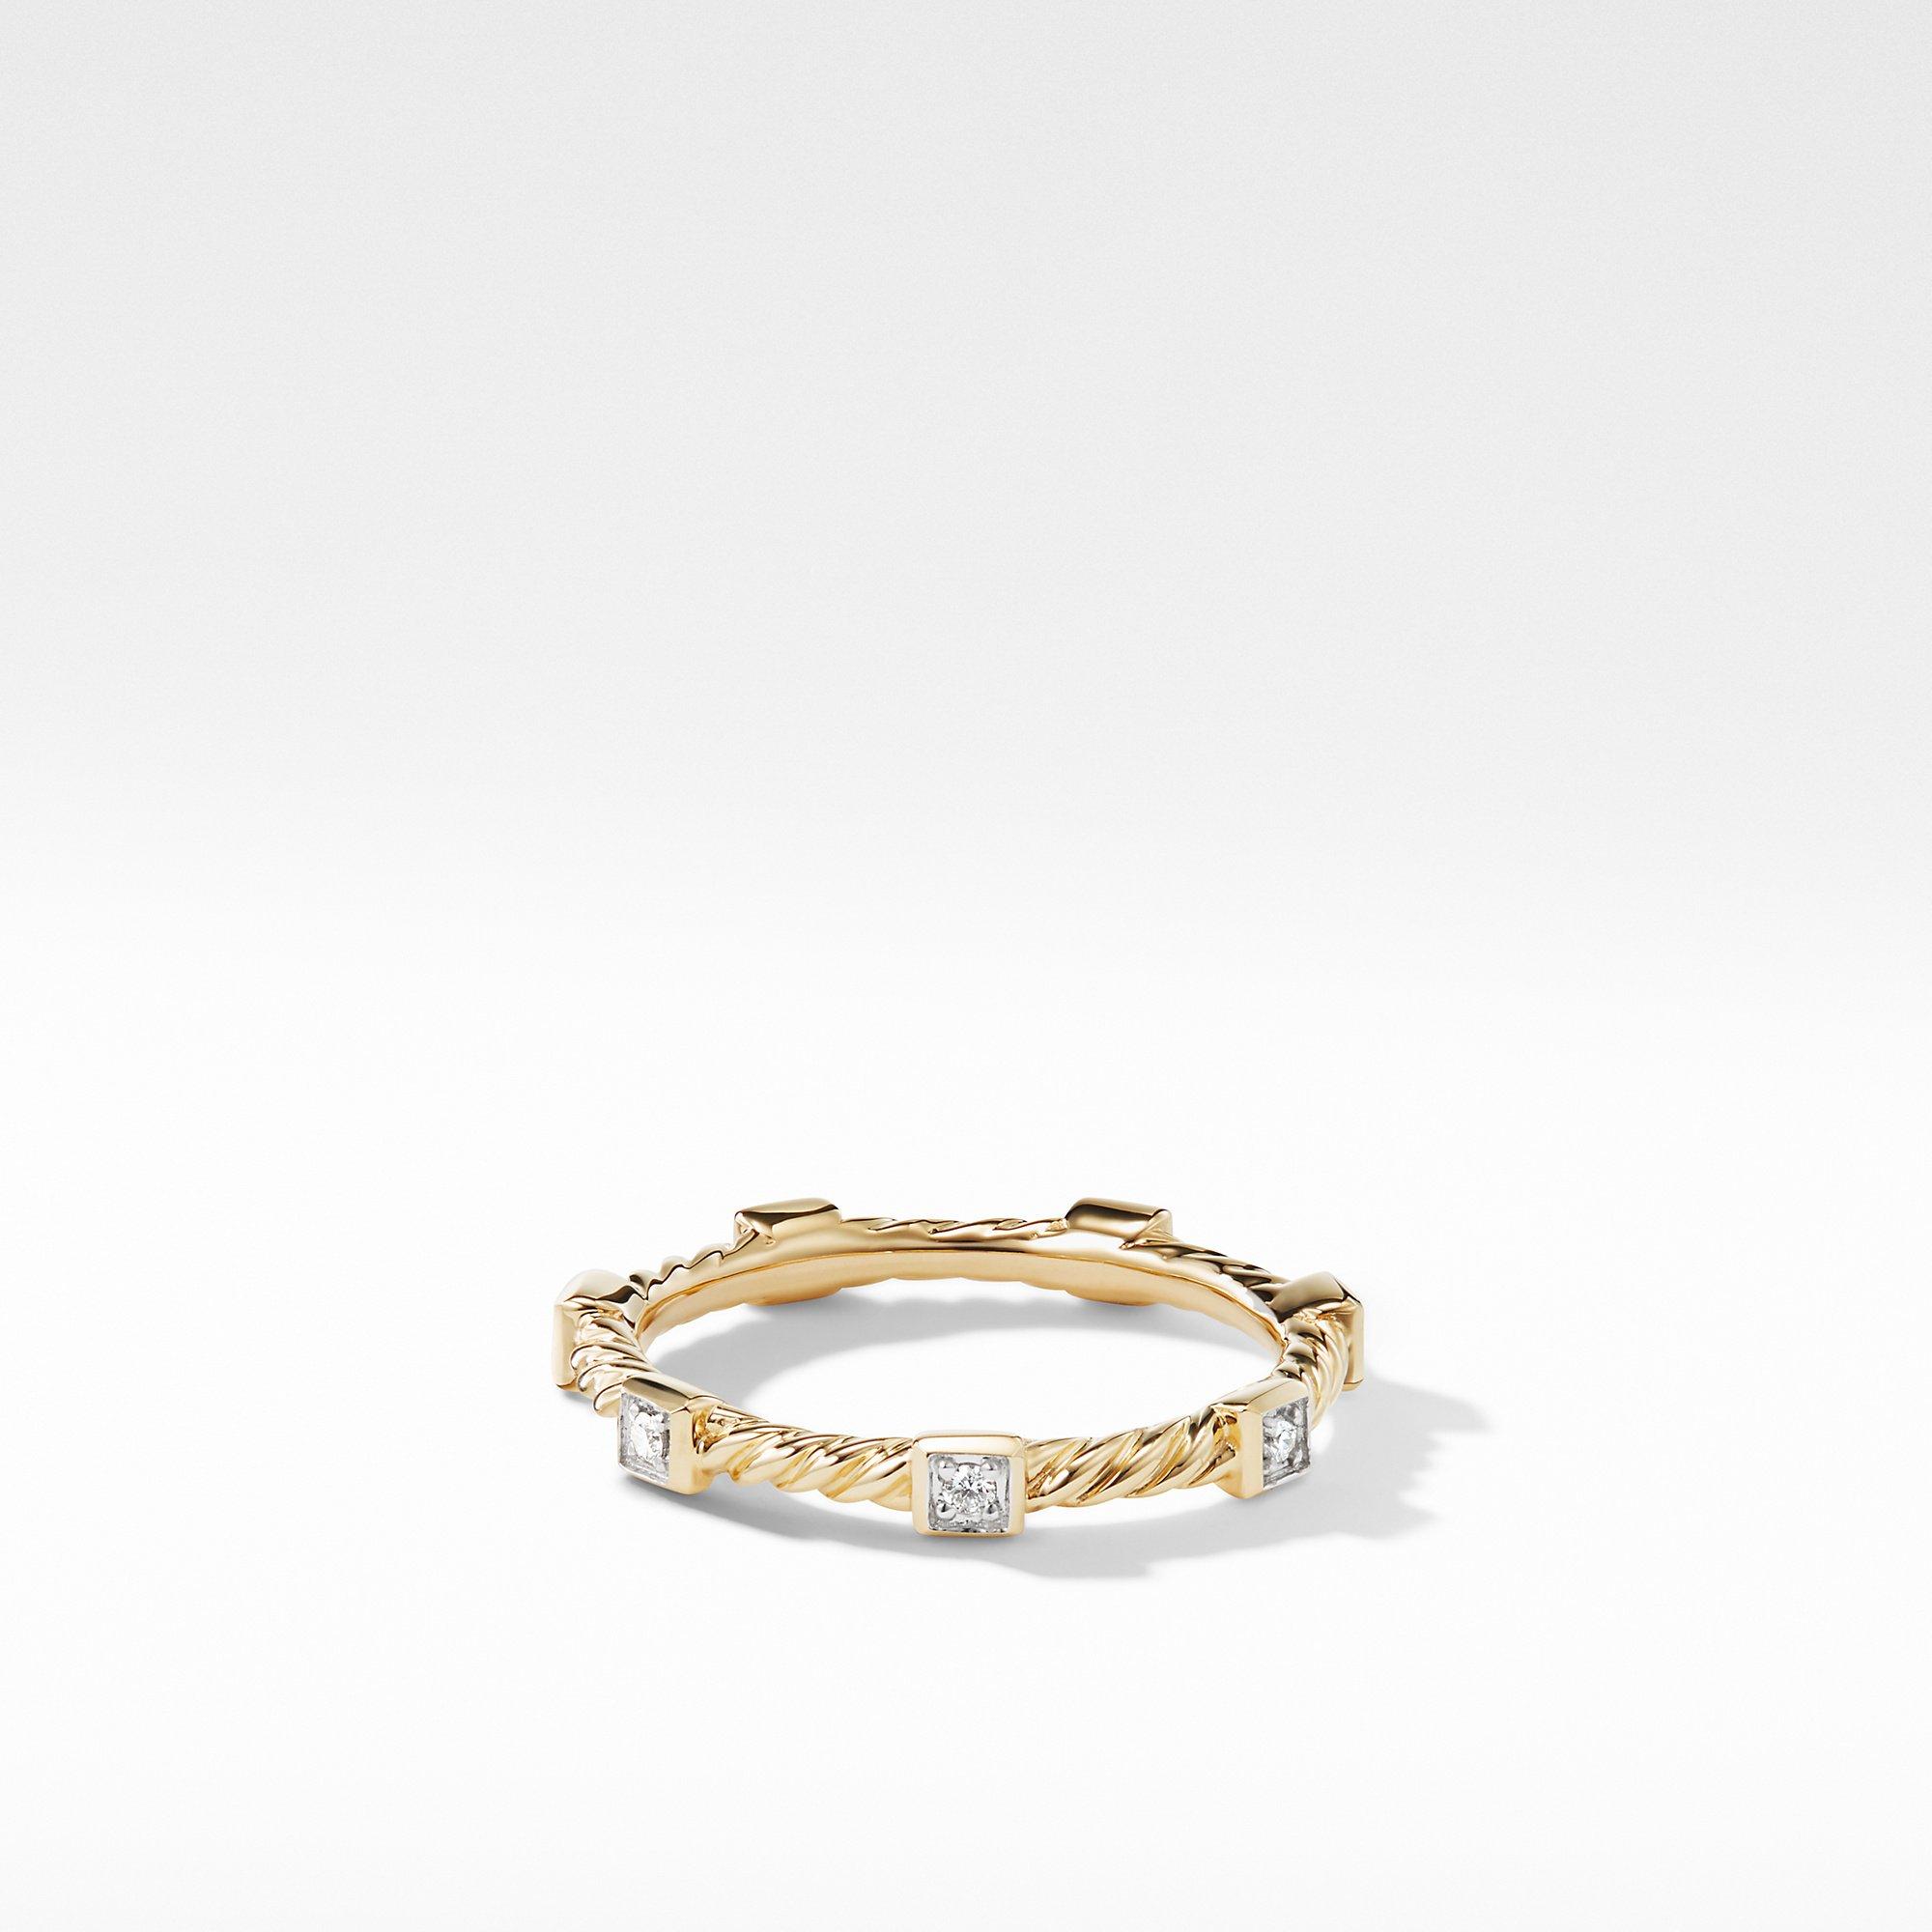 David Yurman Cable Stacking Ring with Square Stations and Diamonds in Yellow Gold, size 6